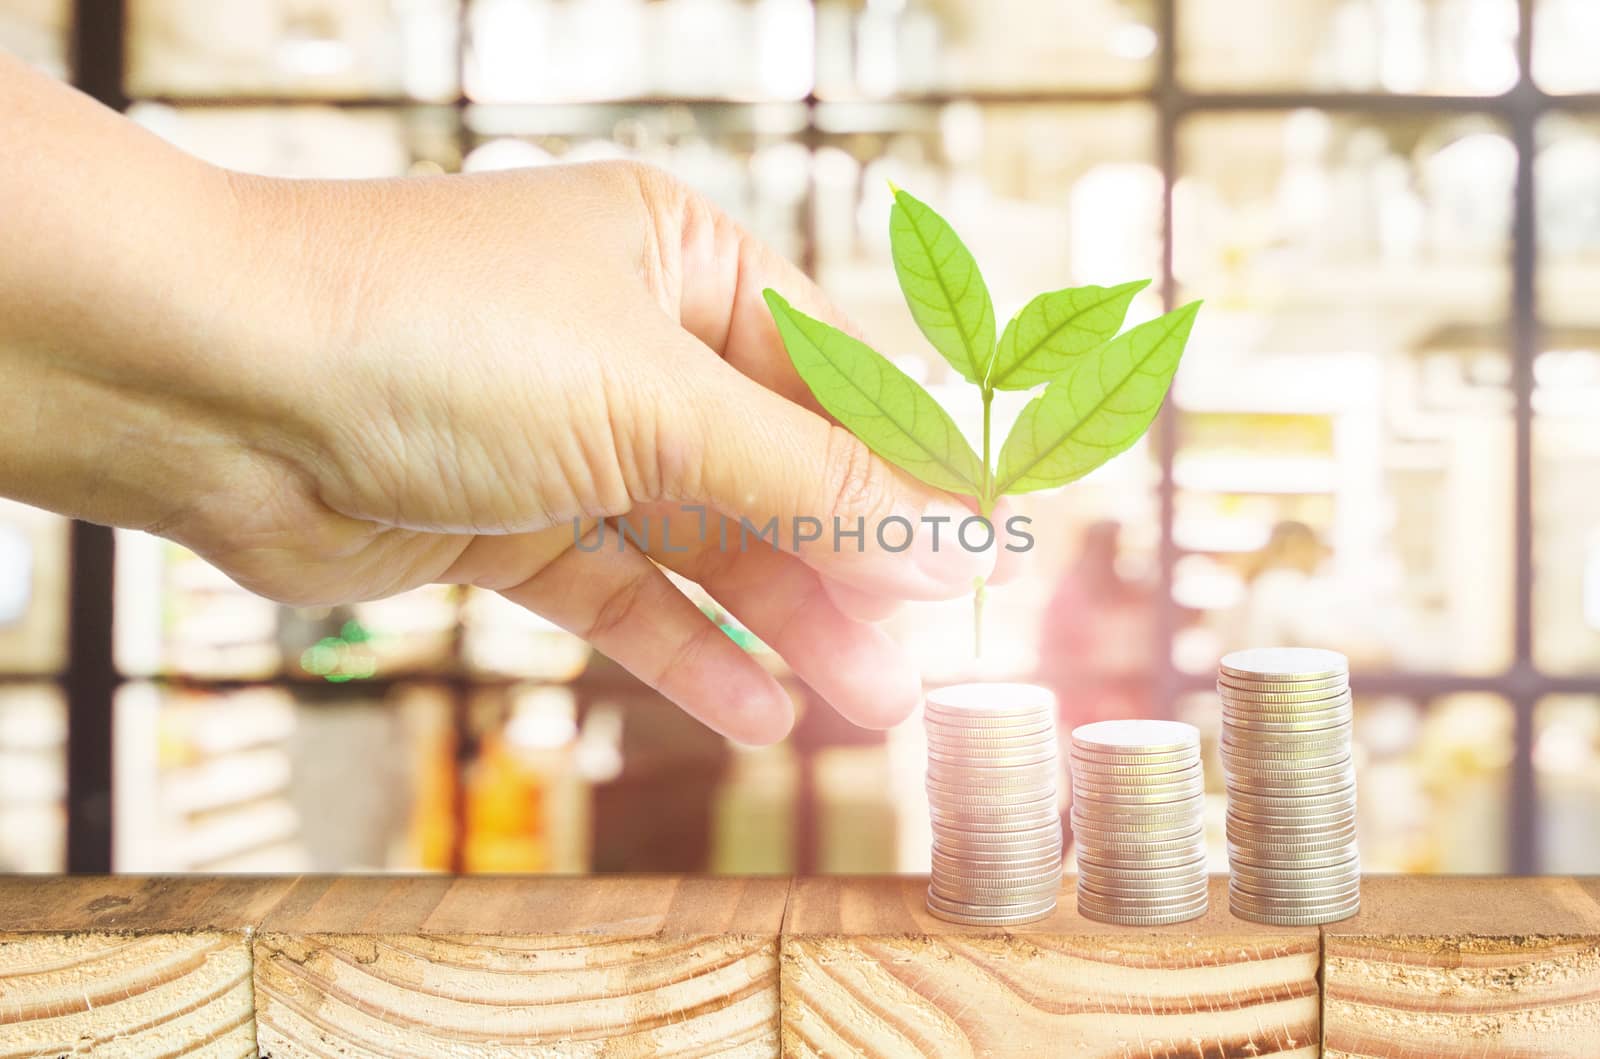 Close-Up Of Female Hand Pick Up The Leaf On The Coin With Office Blur Background ,Business Finance And Money Concept, Business Investment Growth Concept